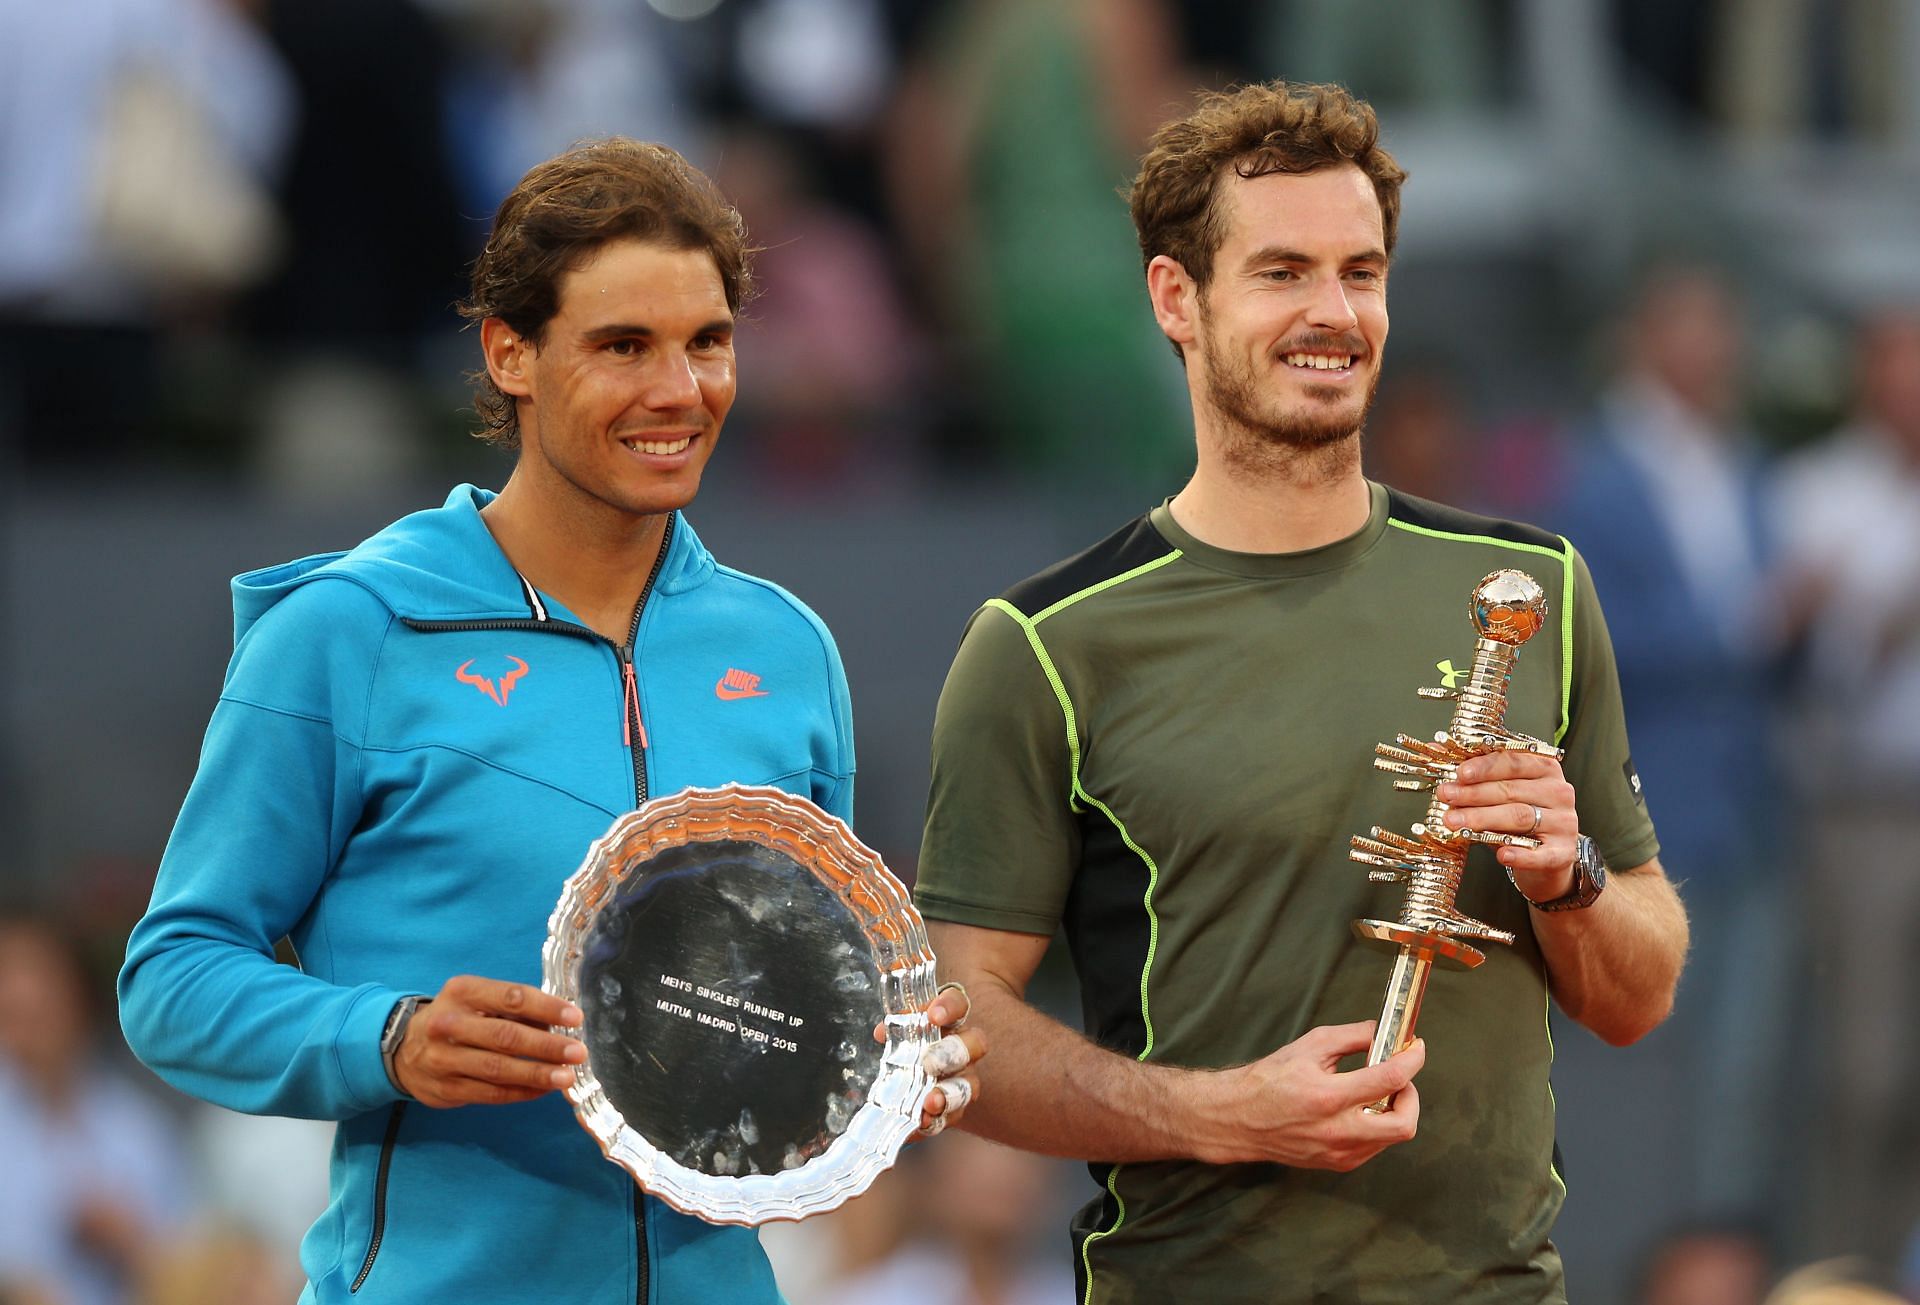 A similar event took place with Rafael Nadal and Andy Murray later at another exhibition show